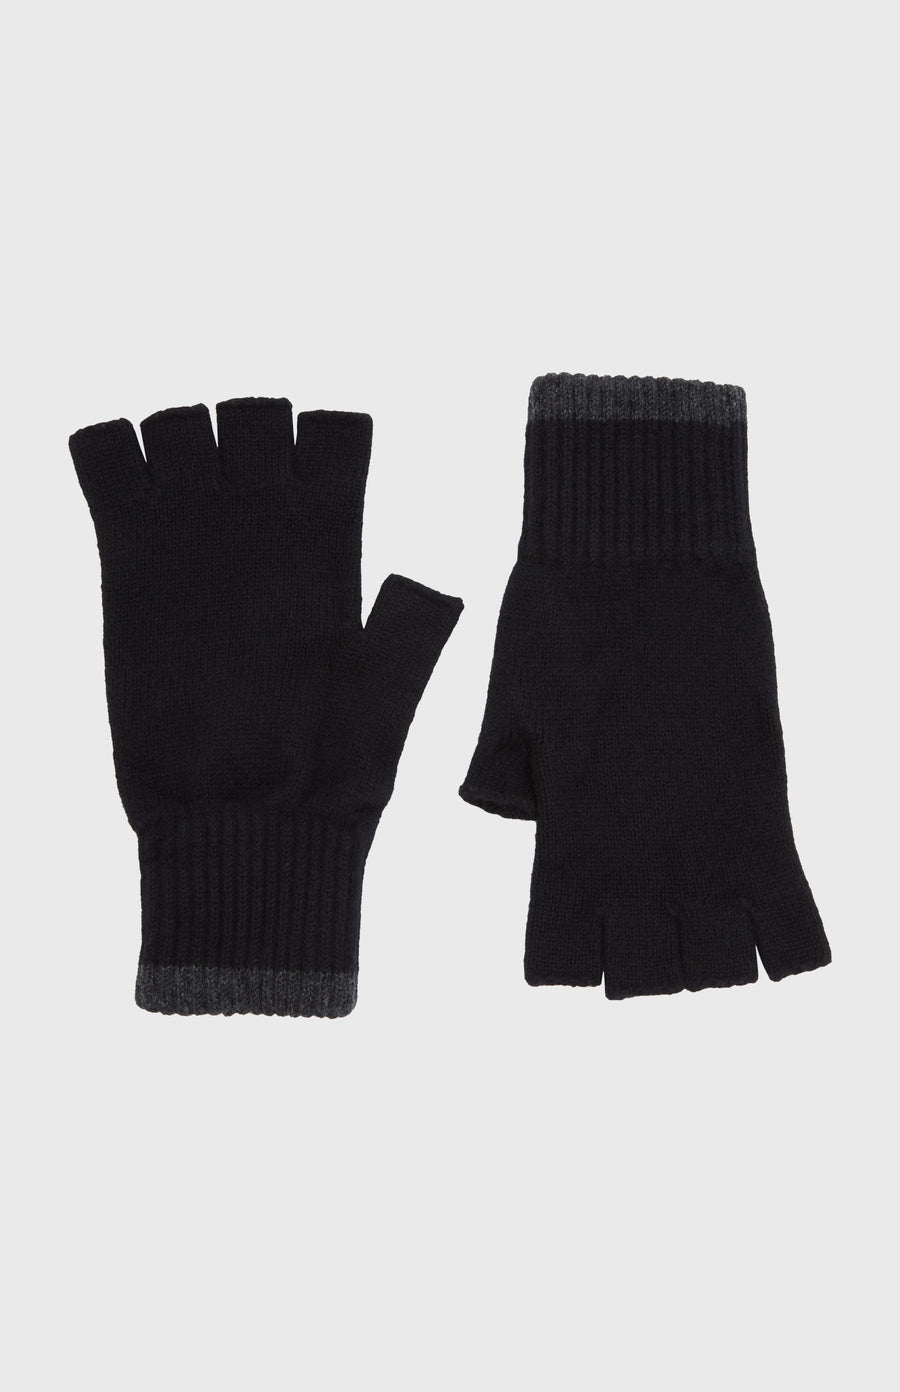 Cashmere Fingerless Gloves in Black and Charcoal - Pringle of Scotland